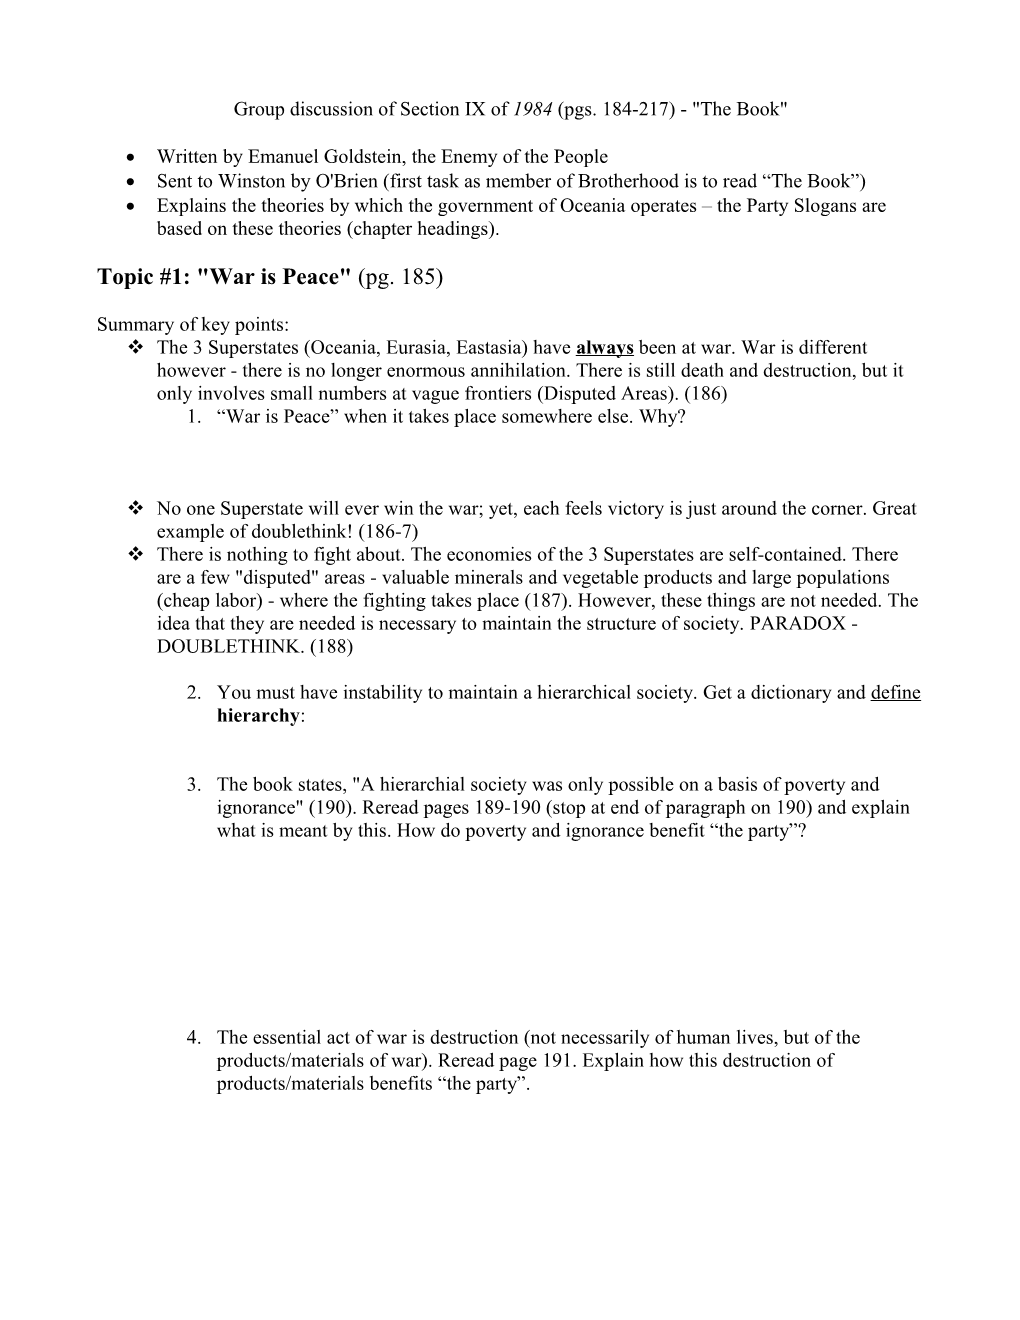 Group Discussion of Section IX of 1984 (Page 184) the Book